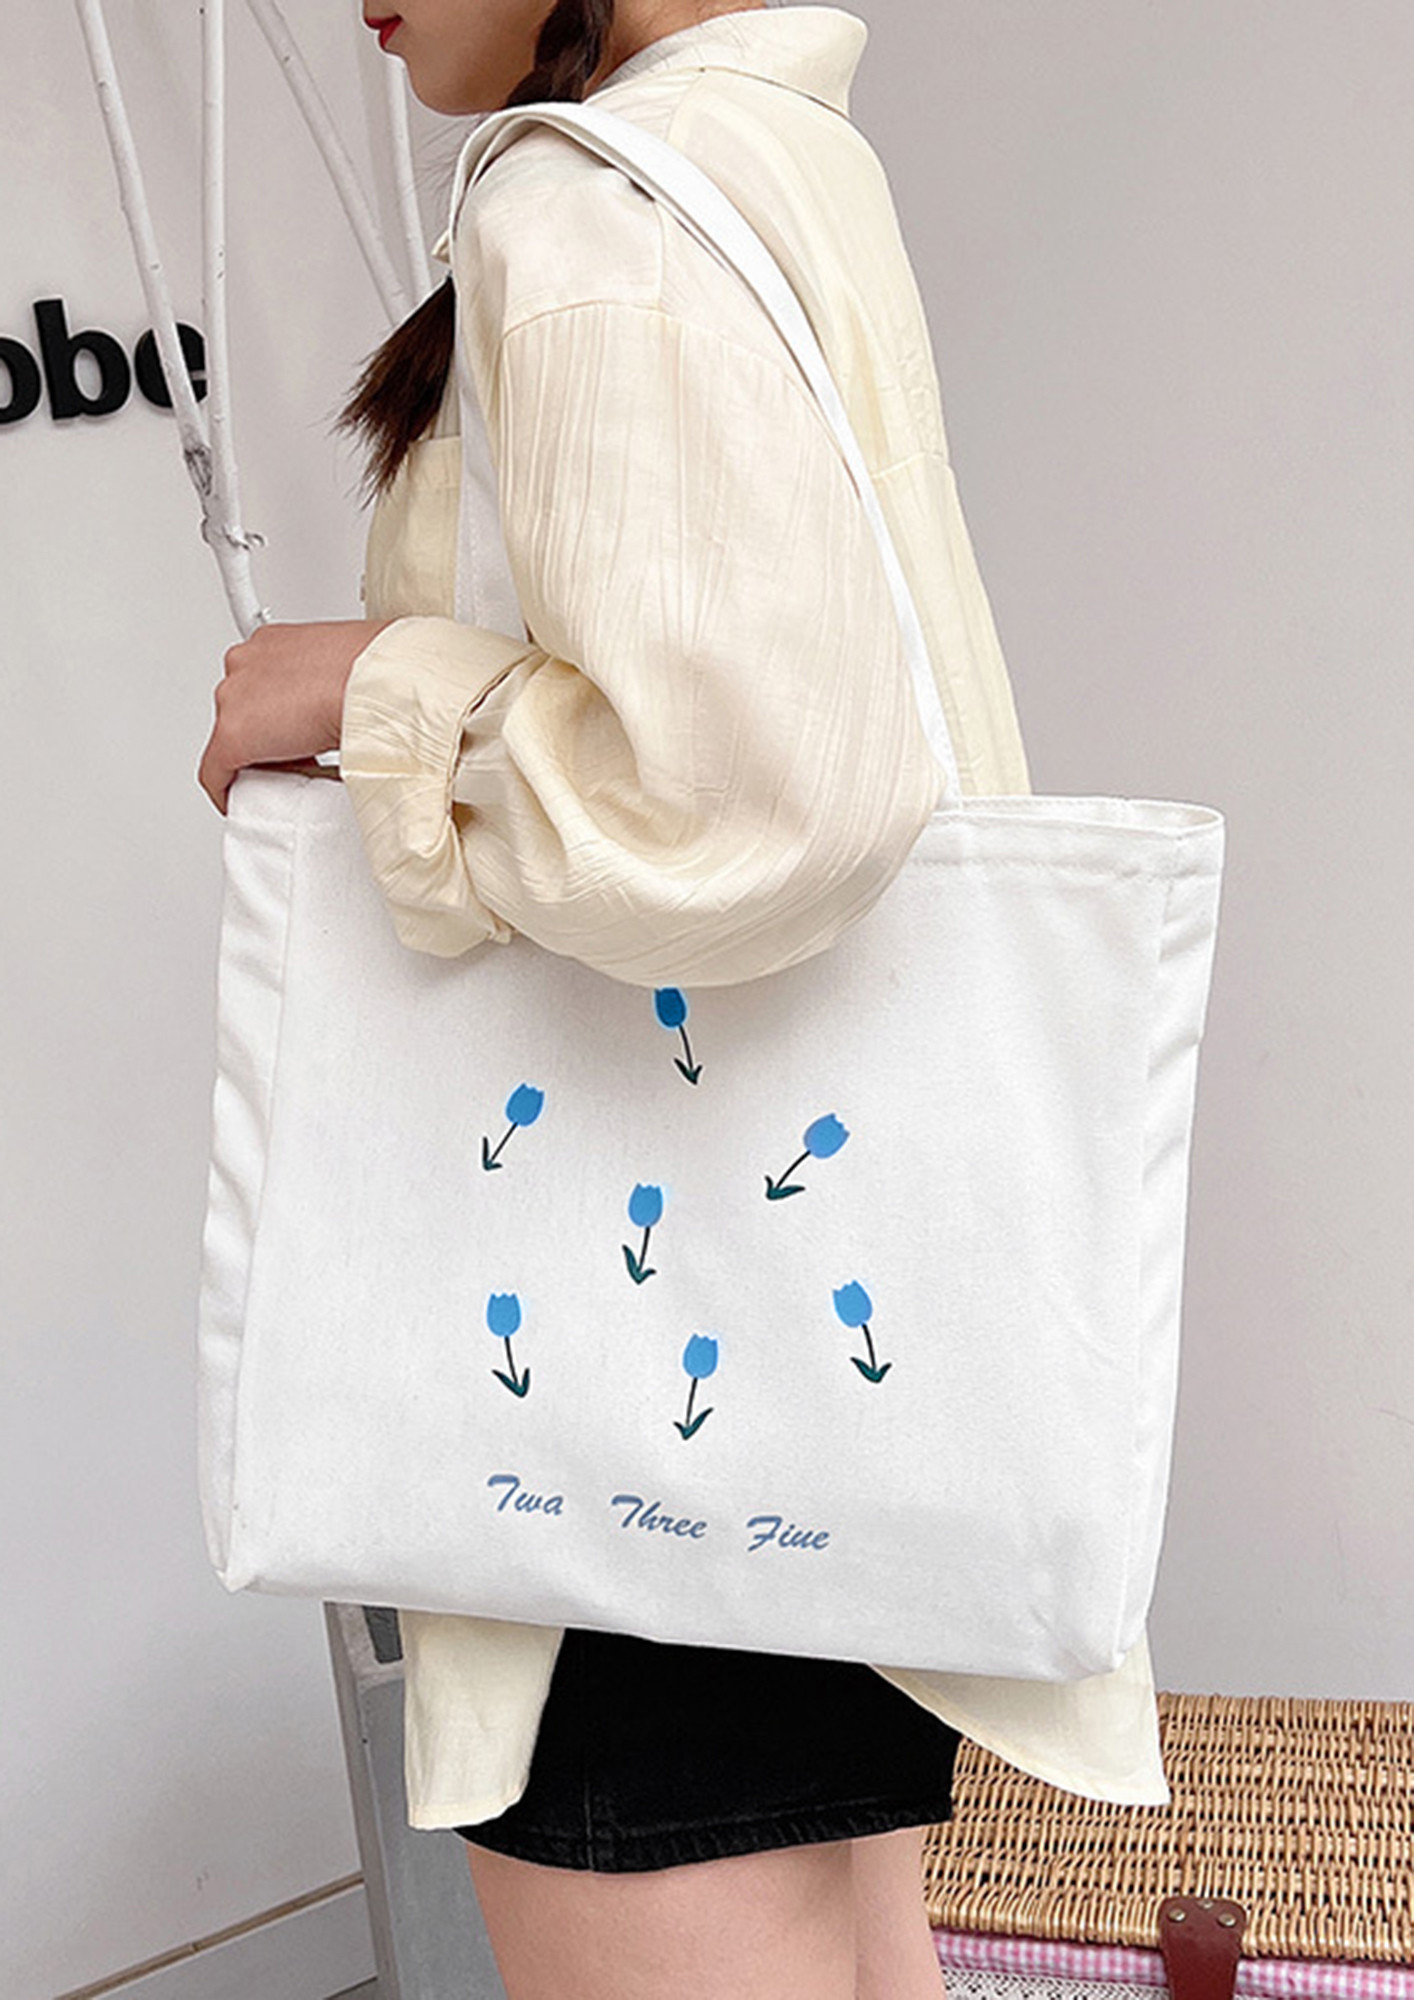 Women's Floral Tote Bag